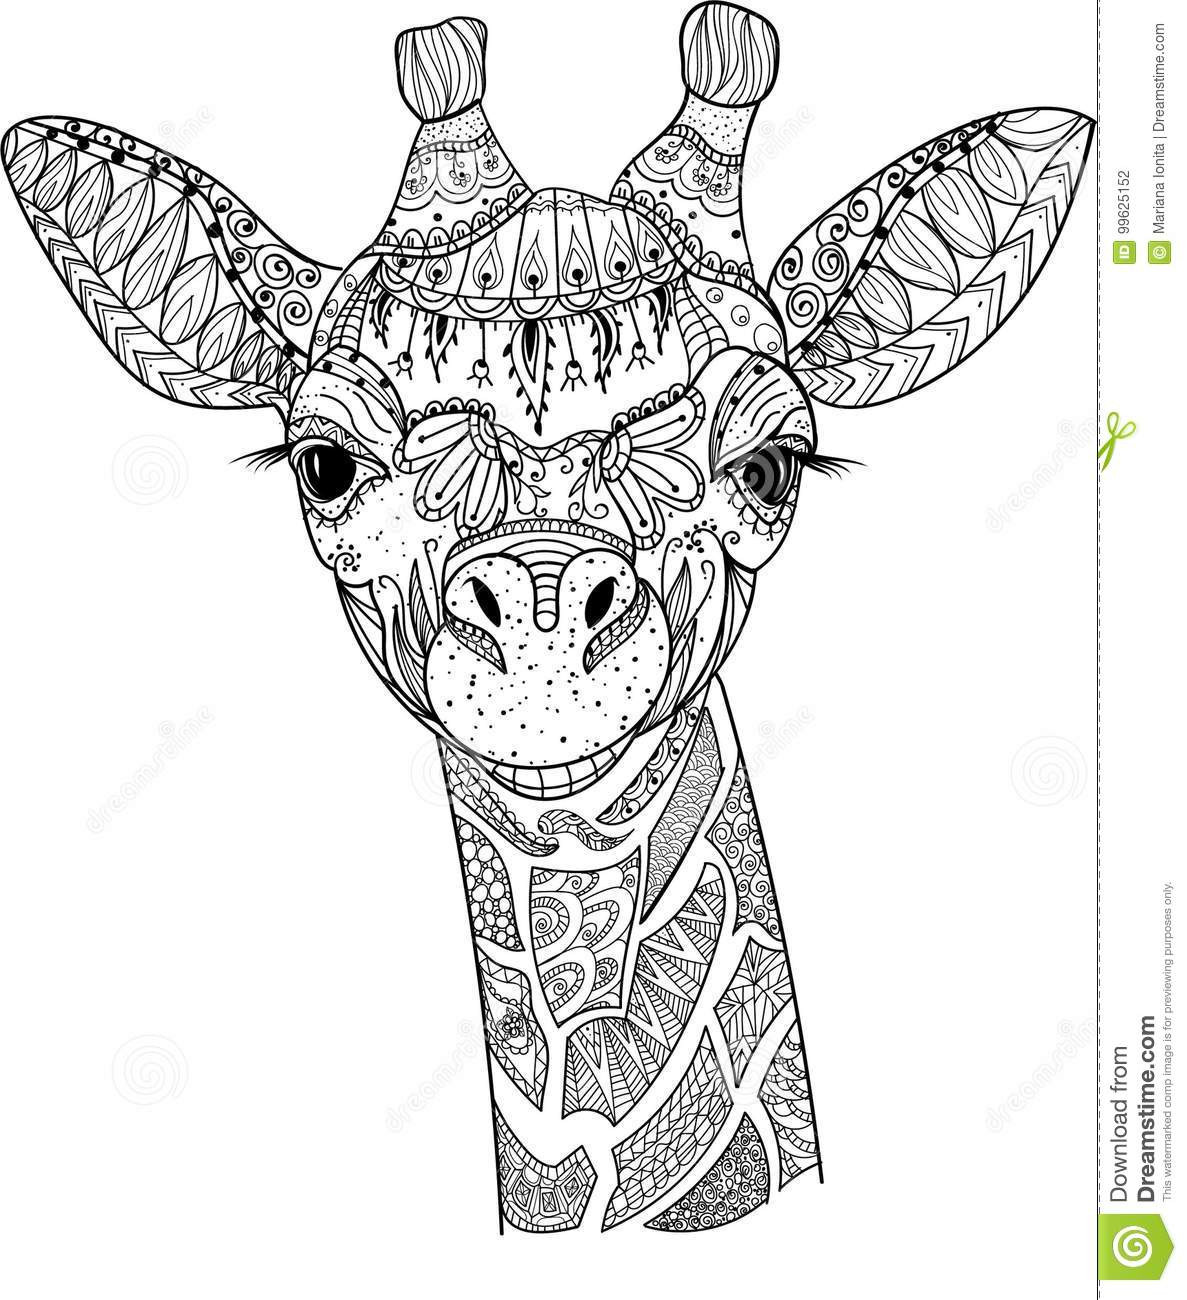 Giraffe Coloring Pages For Adults
 Zentangle giraffe stock vector Illustration of decoration